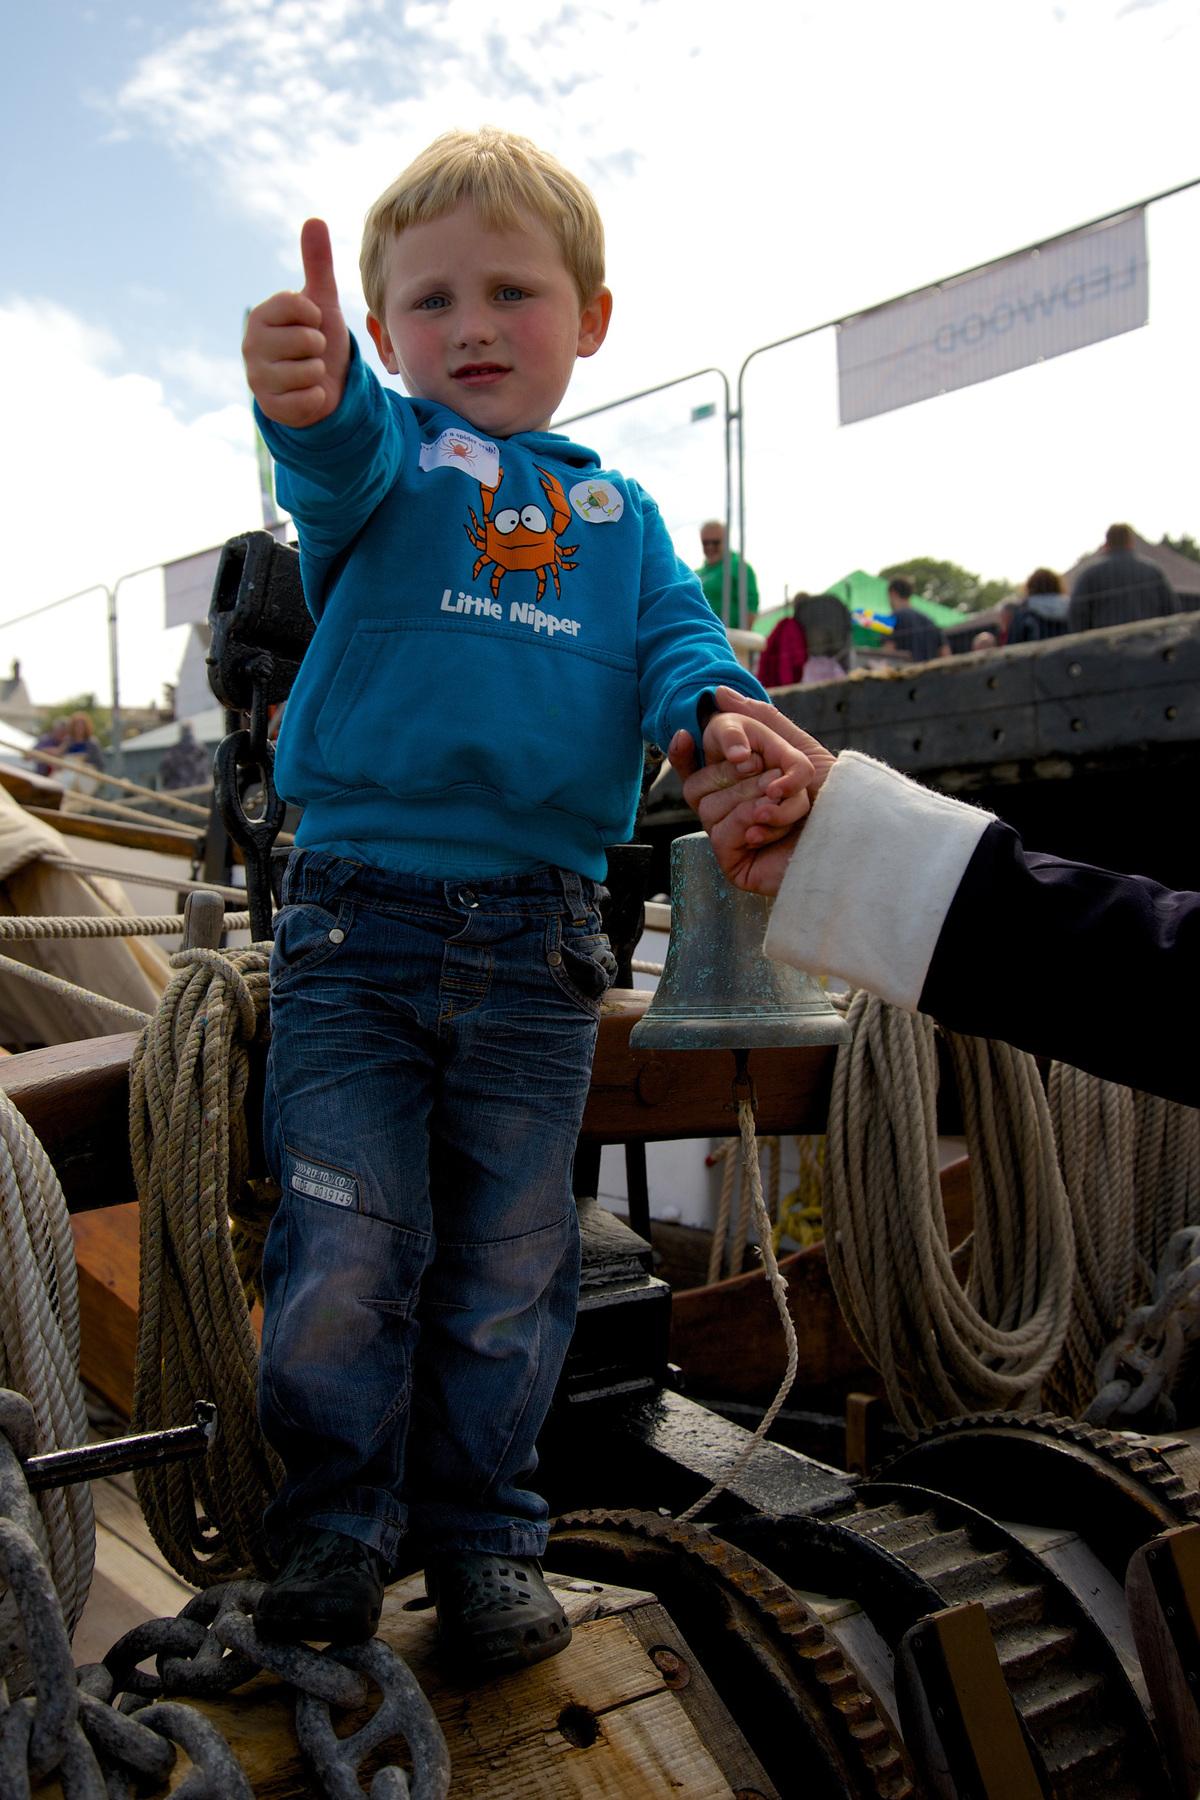 Visitors were hooked by plenty of fishy family fun at Milford Docks at the opening of Pembrokeshire Fish Week.